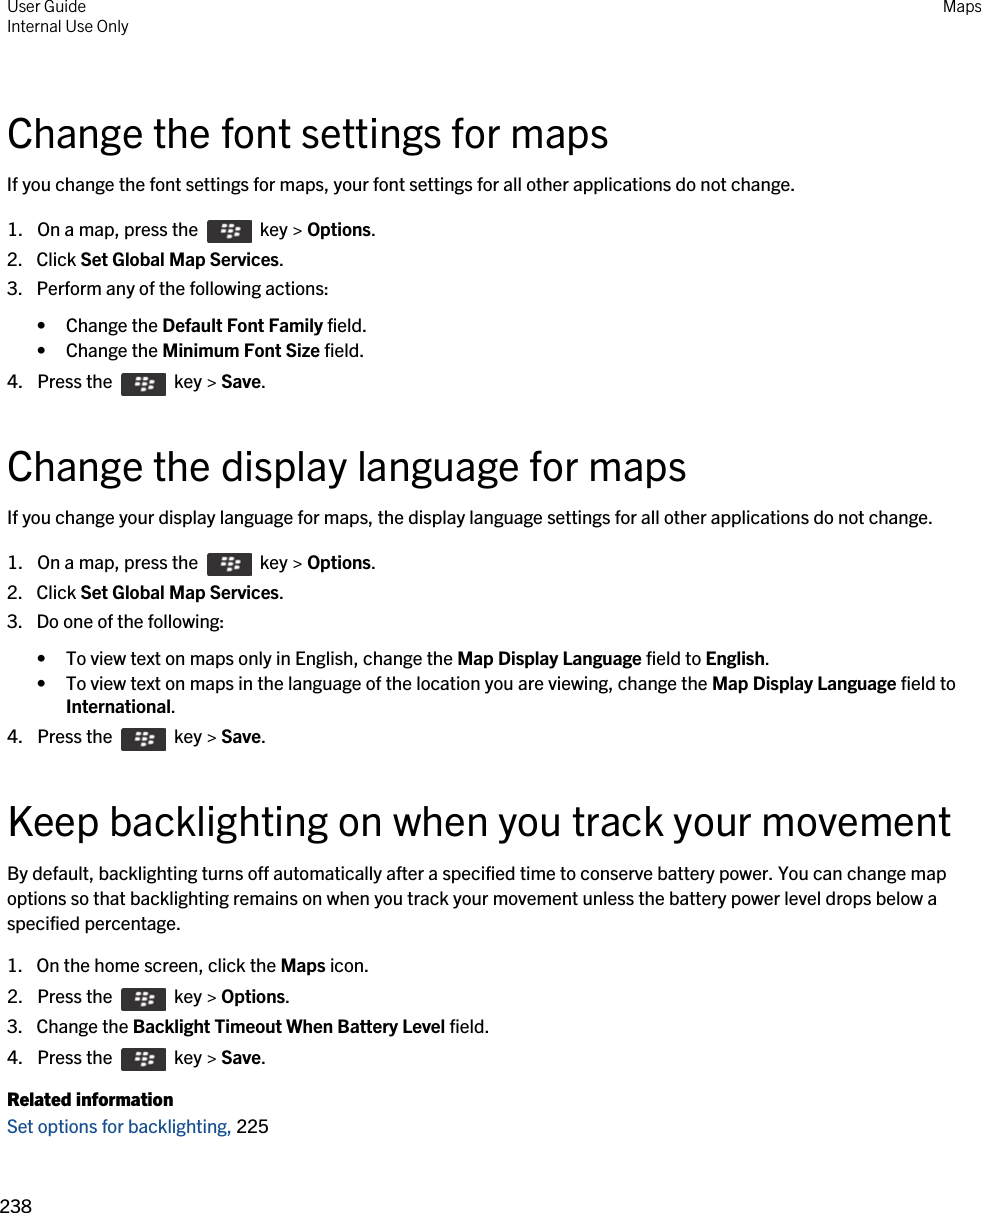 Change the font settings for mapsIf you change the font settings for maps, your font settings for all other applications do not change.1.  On a map, press the    key &gt; Options.2. Click Set Global Map Services.3. Perform any of the following actions:• Change the Default Font Family field.• Change the Minimum Font Size field.4.  Press the    key &gt; Save. Change the display language for mapsIf you change your display language for maps, the display language settings for all other applications do not change.1.  On a map, press the    key &gt; Options.2. Click Set Global Map Services.3. Do one of the following:• To view text on maps only in English, change the Map Display Language field to English.• To view text on maps in the language of the location you are viewing, change the Map Display Language field to International.4.  Press the    key &gt; Save. Keep backlighting on when you track your movementBy default, backlighting turns off automatically after a specified time to conserve battery power. You can change map options so that backlighting remains on when you track your movement unless the battery power level drops below a specified percentage.1. On the home screen, click the Maps icon.2.  Press the    key &gt; Options. 3. Change the Backlight Timeout When Battery Level field.4.  Press the    key &gt; Save. Related informationSet options for backlighting, 225 User GuideInternal Use Only Maps238 